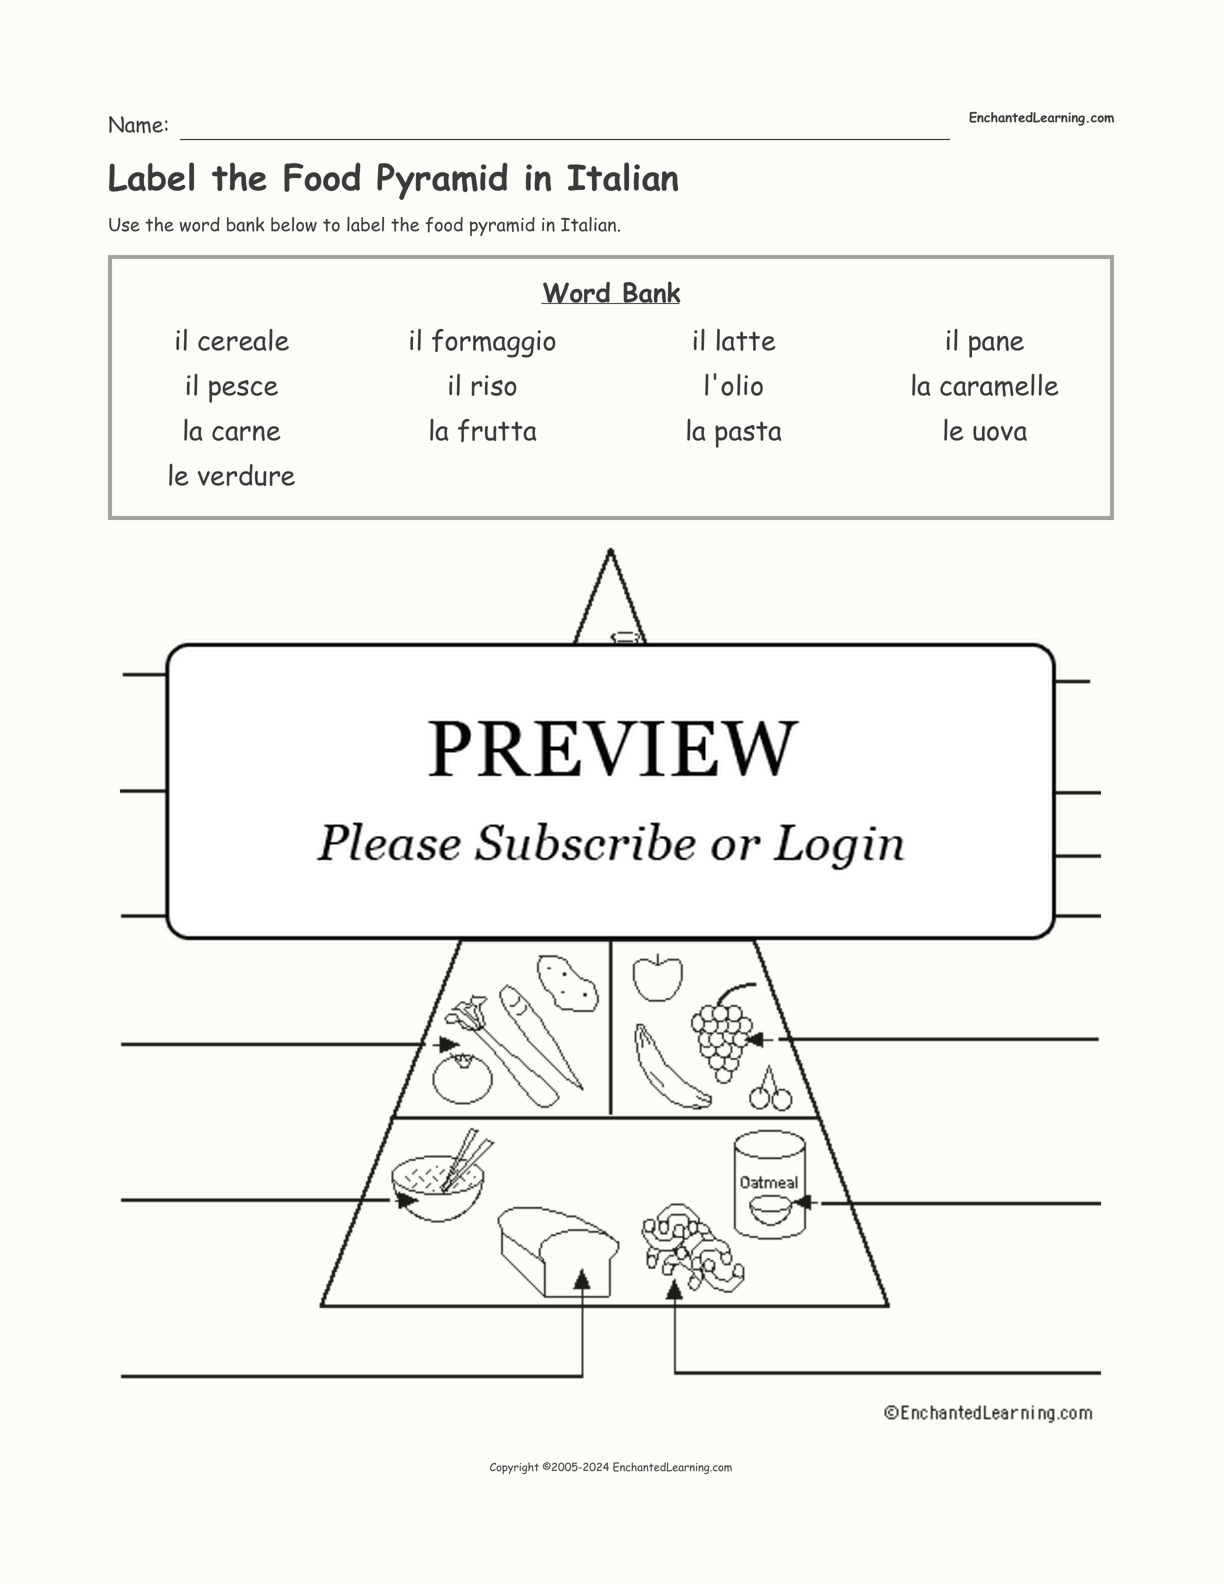 Label the Food Pyramid in Italian interactive worksheet page 1